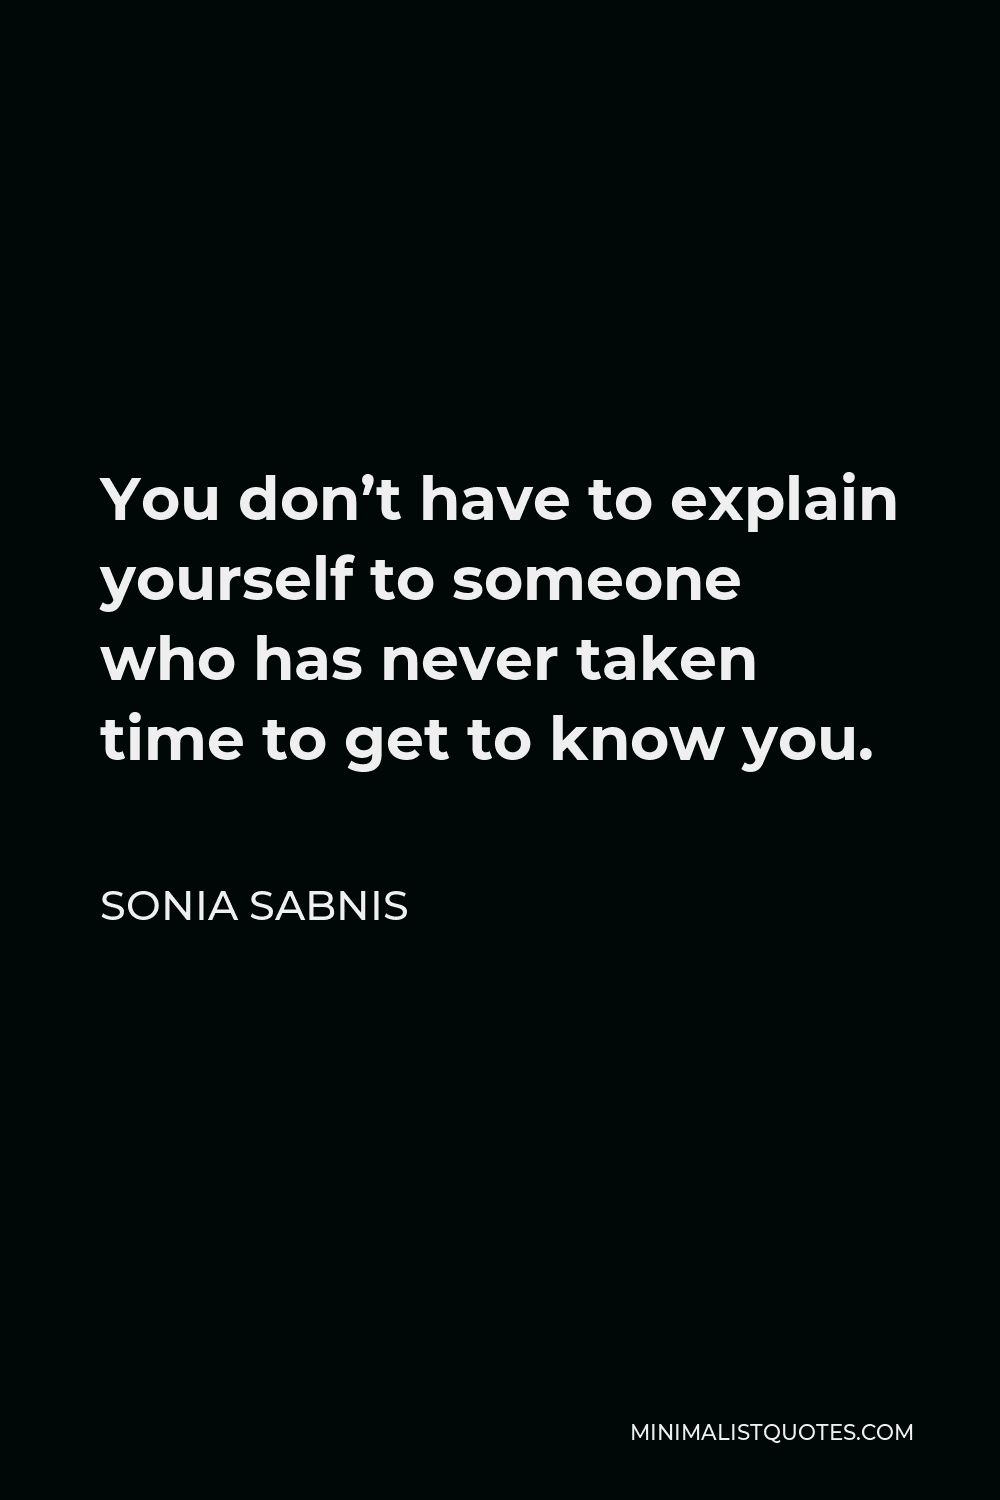 Sonia Sabnis Quote - You don’t have to explain yourself to someone who has never taken time to get to know you.